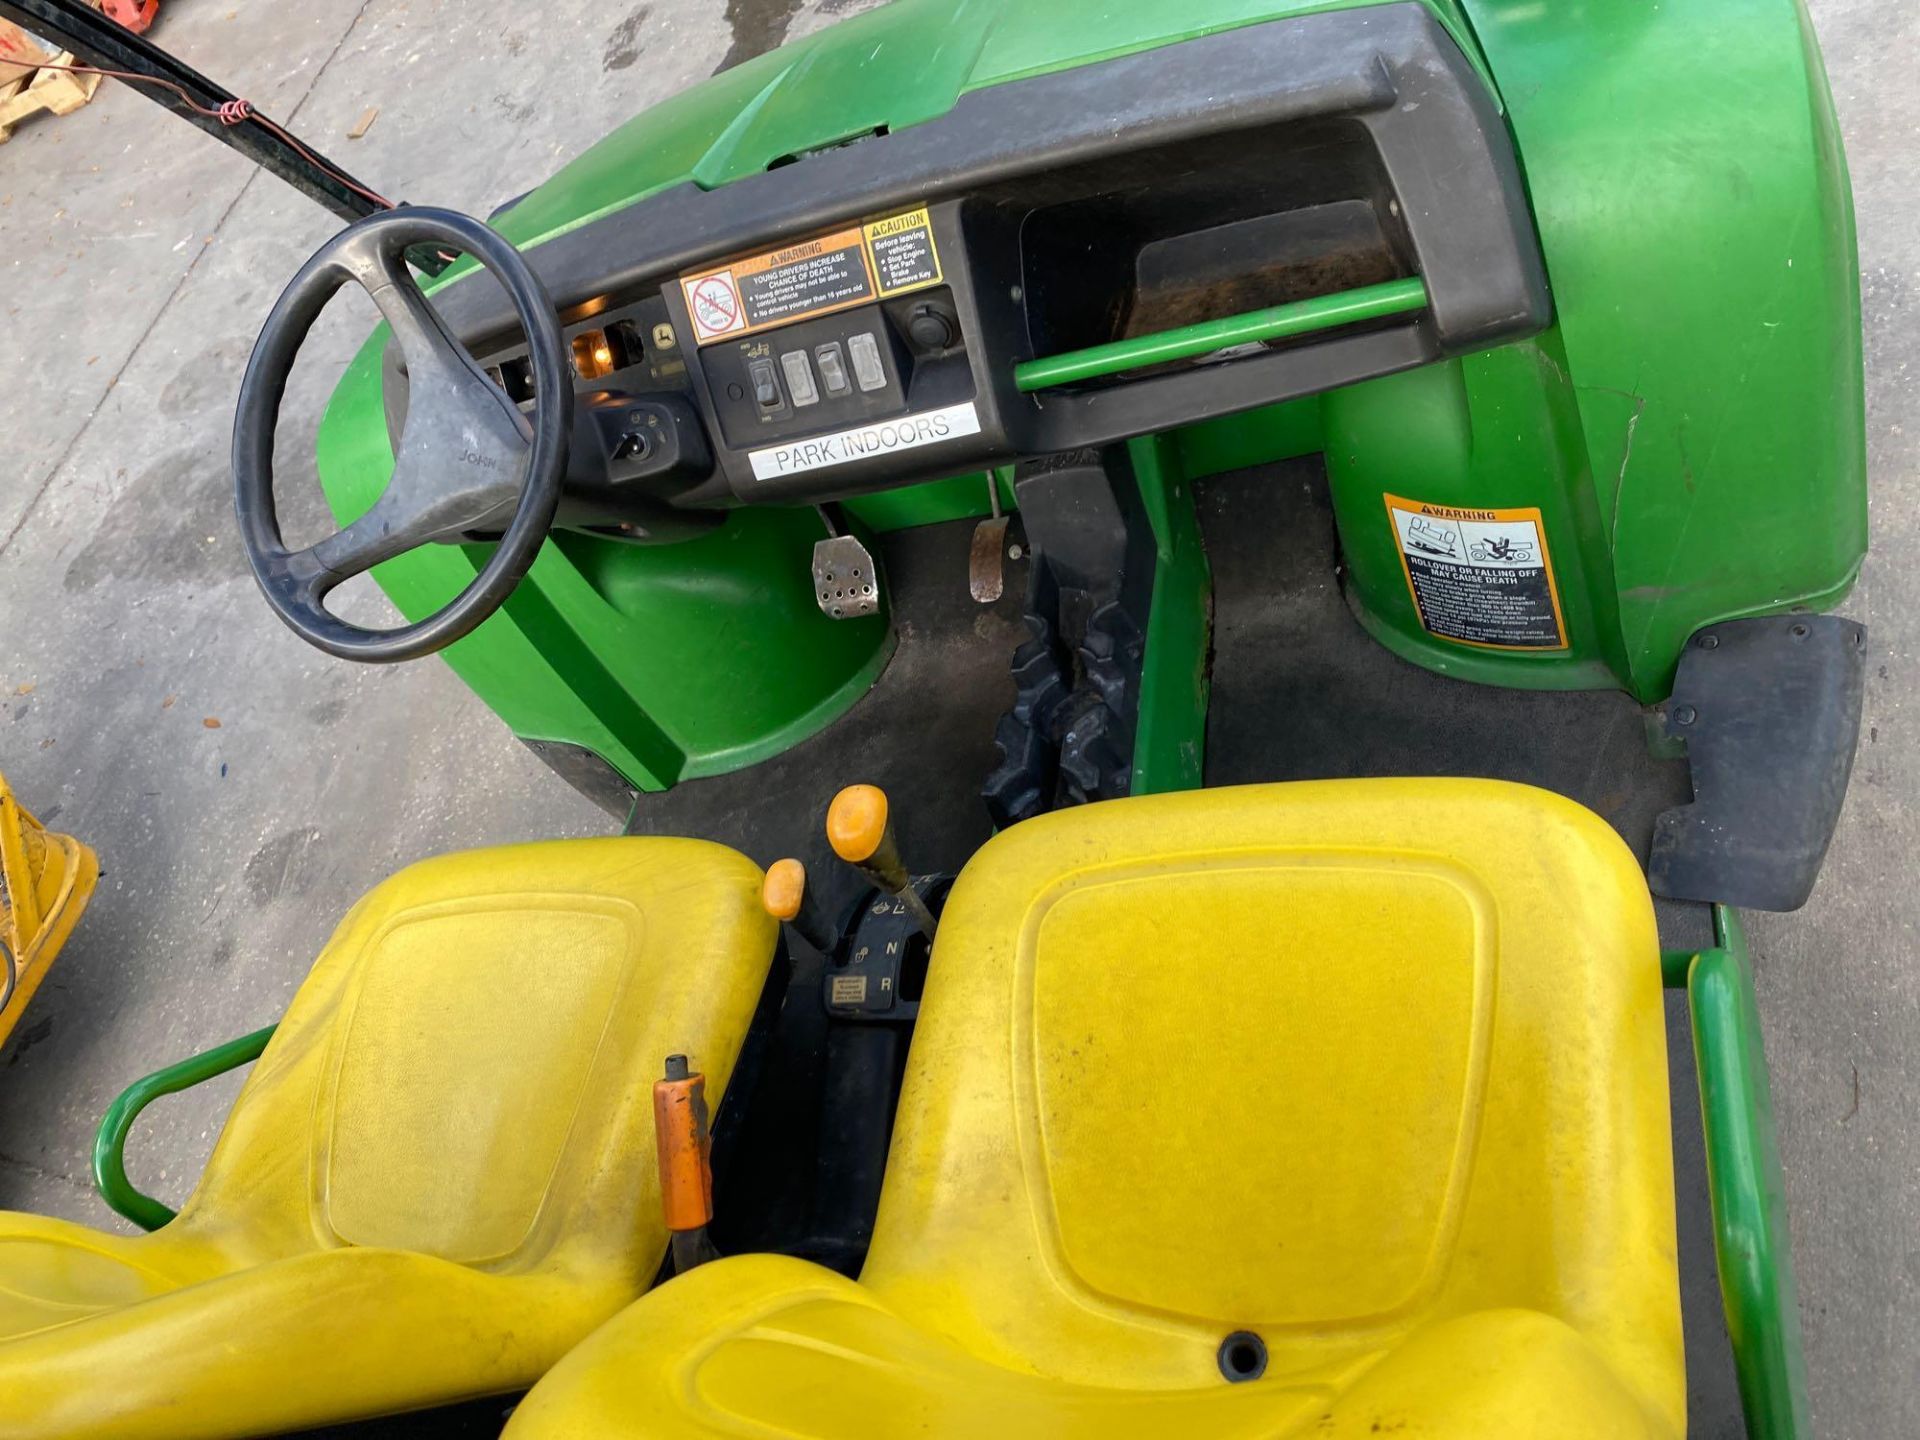 JOHN DEERE GATOR XUV UTILITY CART WITH HYDRAULIC DUMP BED, GAS POWERED, 1,713 HOURS SHOWING 4x4 - Image 8 of 9